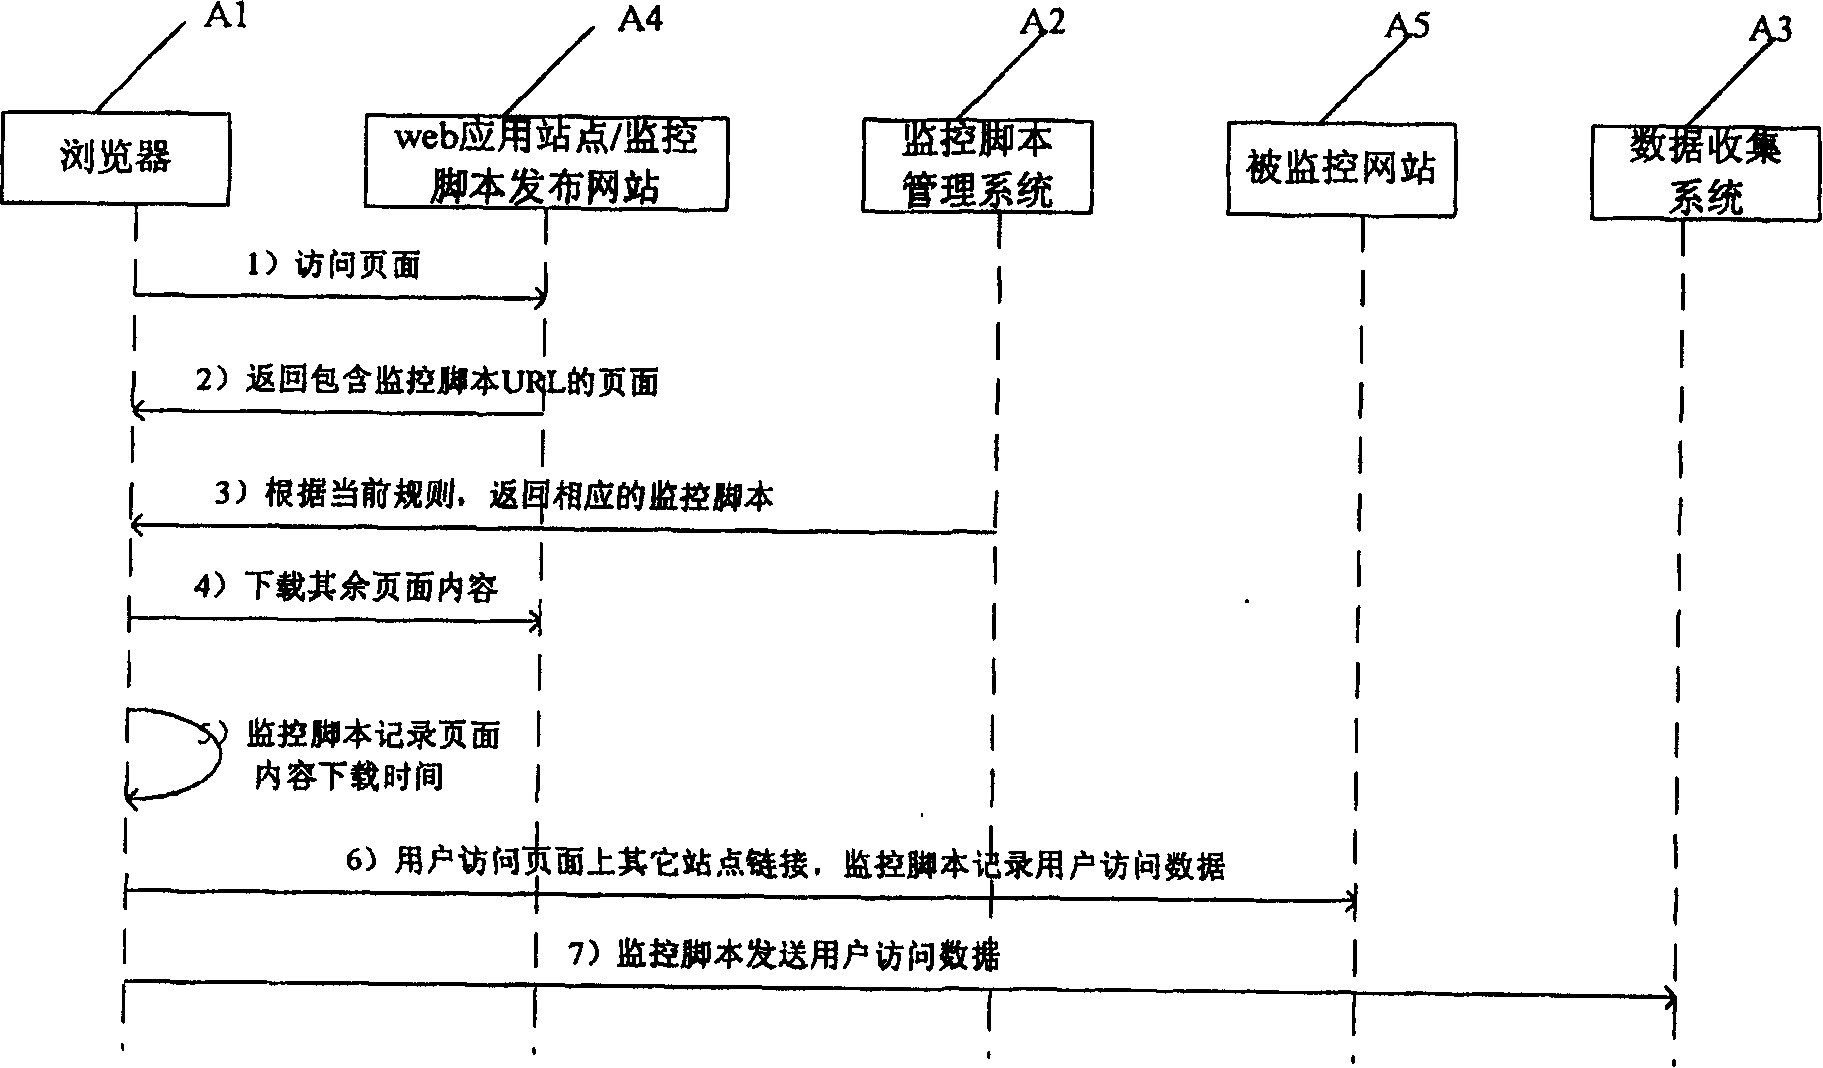 Method and system for collecting web user action and performance data